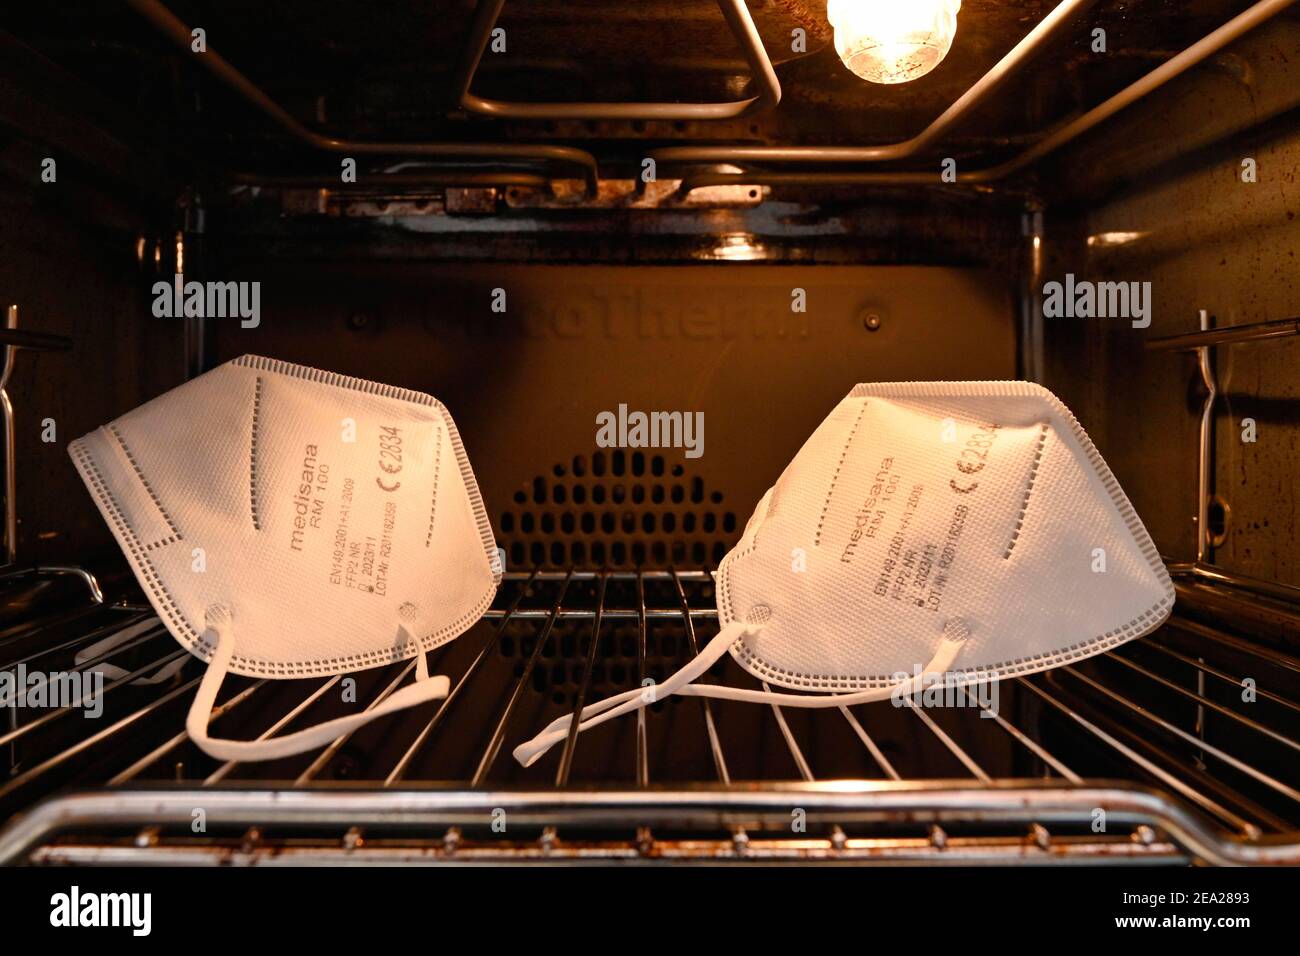 FFP2 masks are reprocessed in the oven at 80C top and bottom heat, disinfected, Corona crisis, Germany Stock Photo